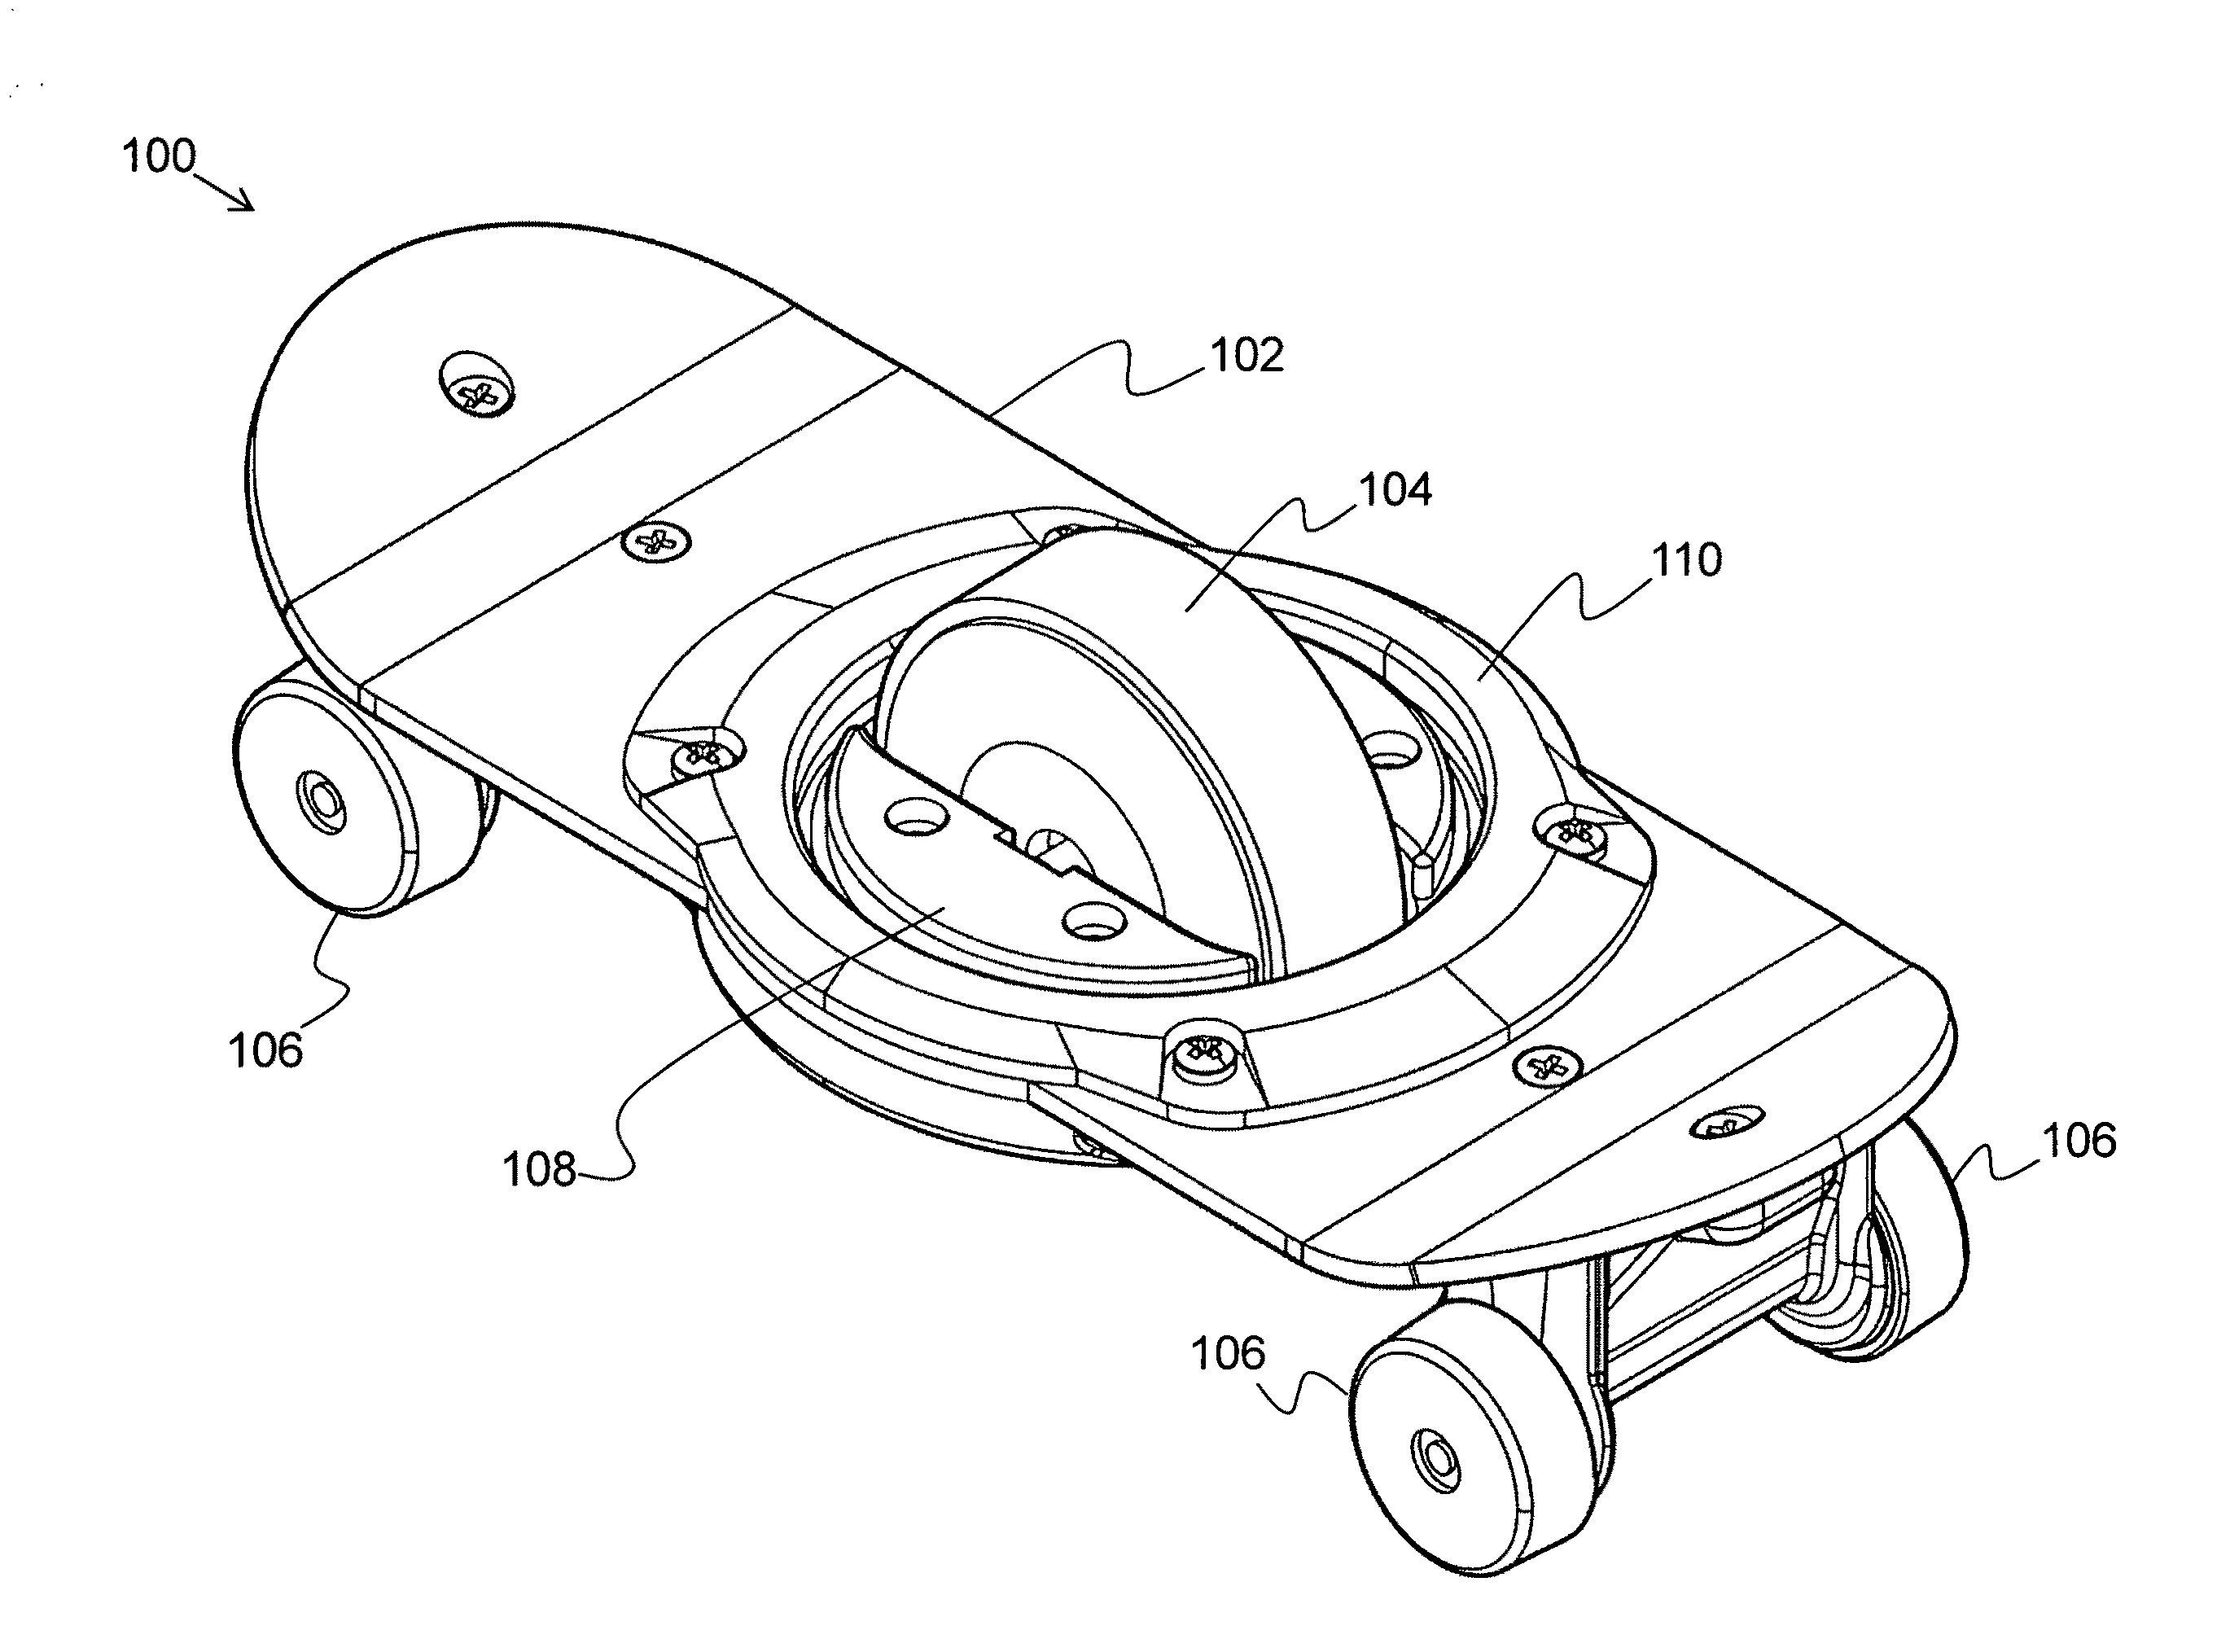 Mobile skateboard-shaped toy with a flywheel